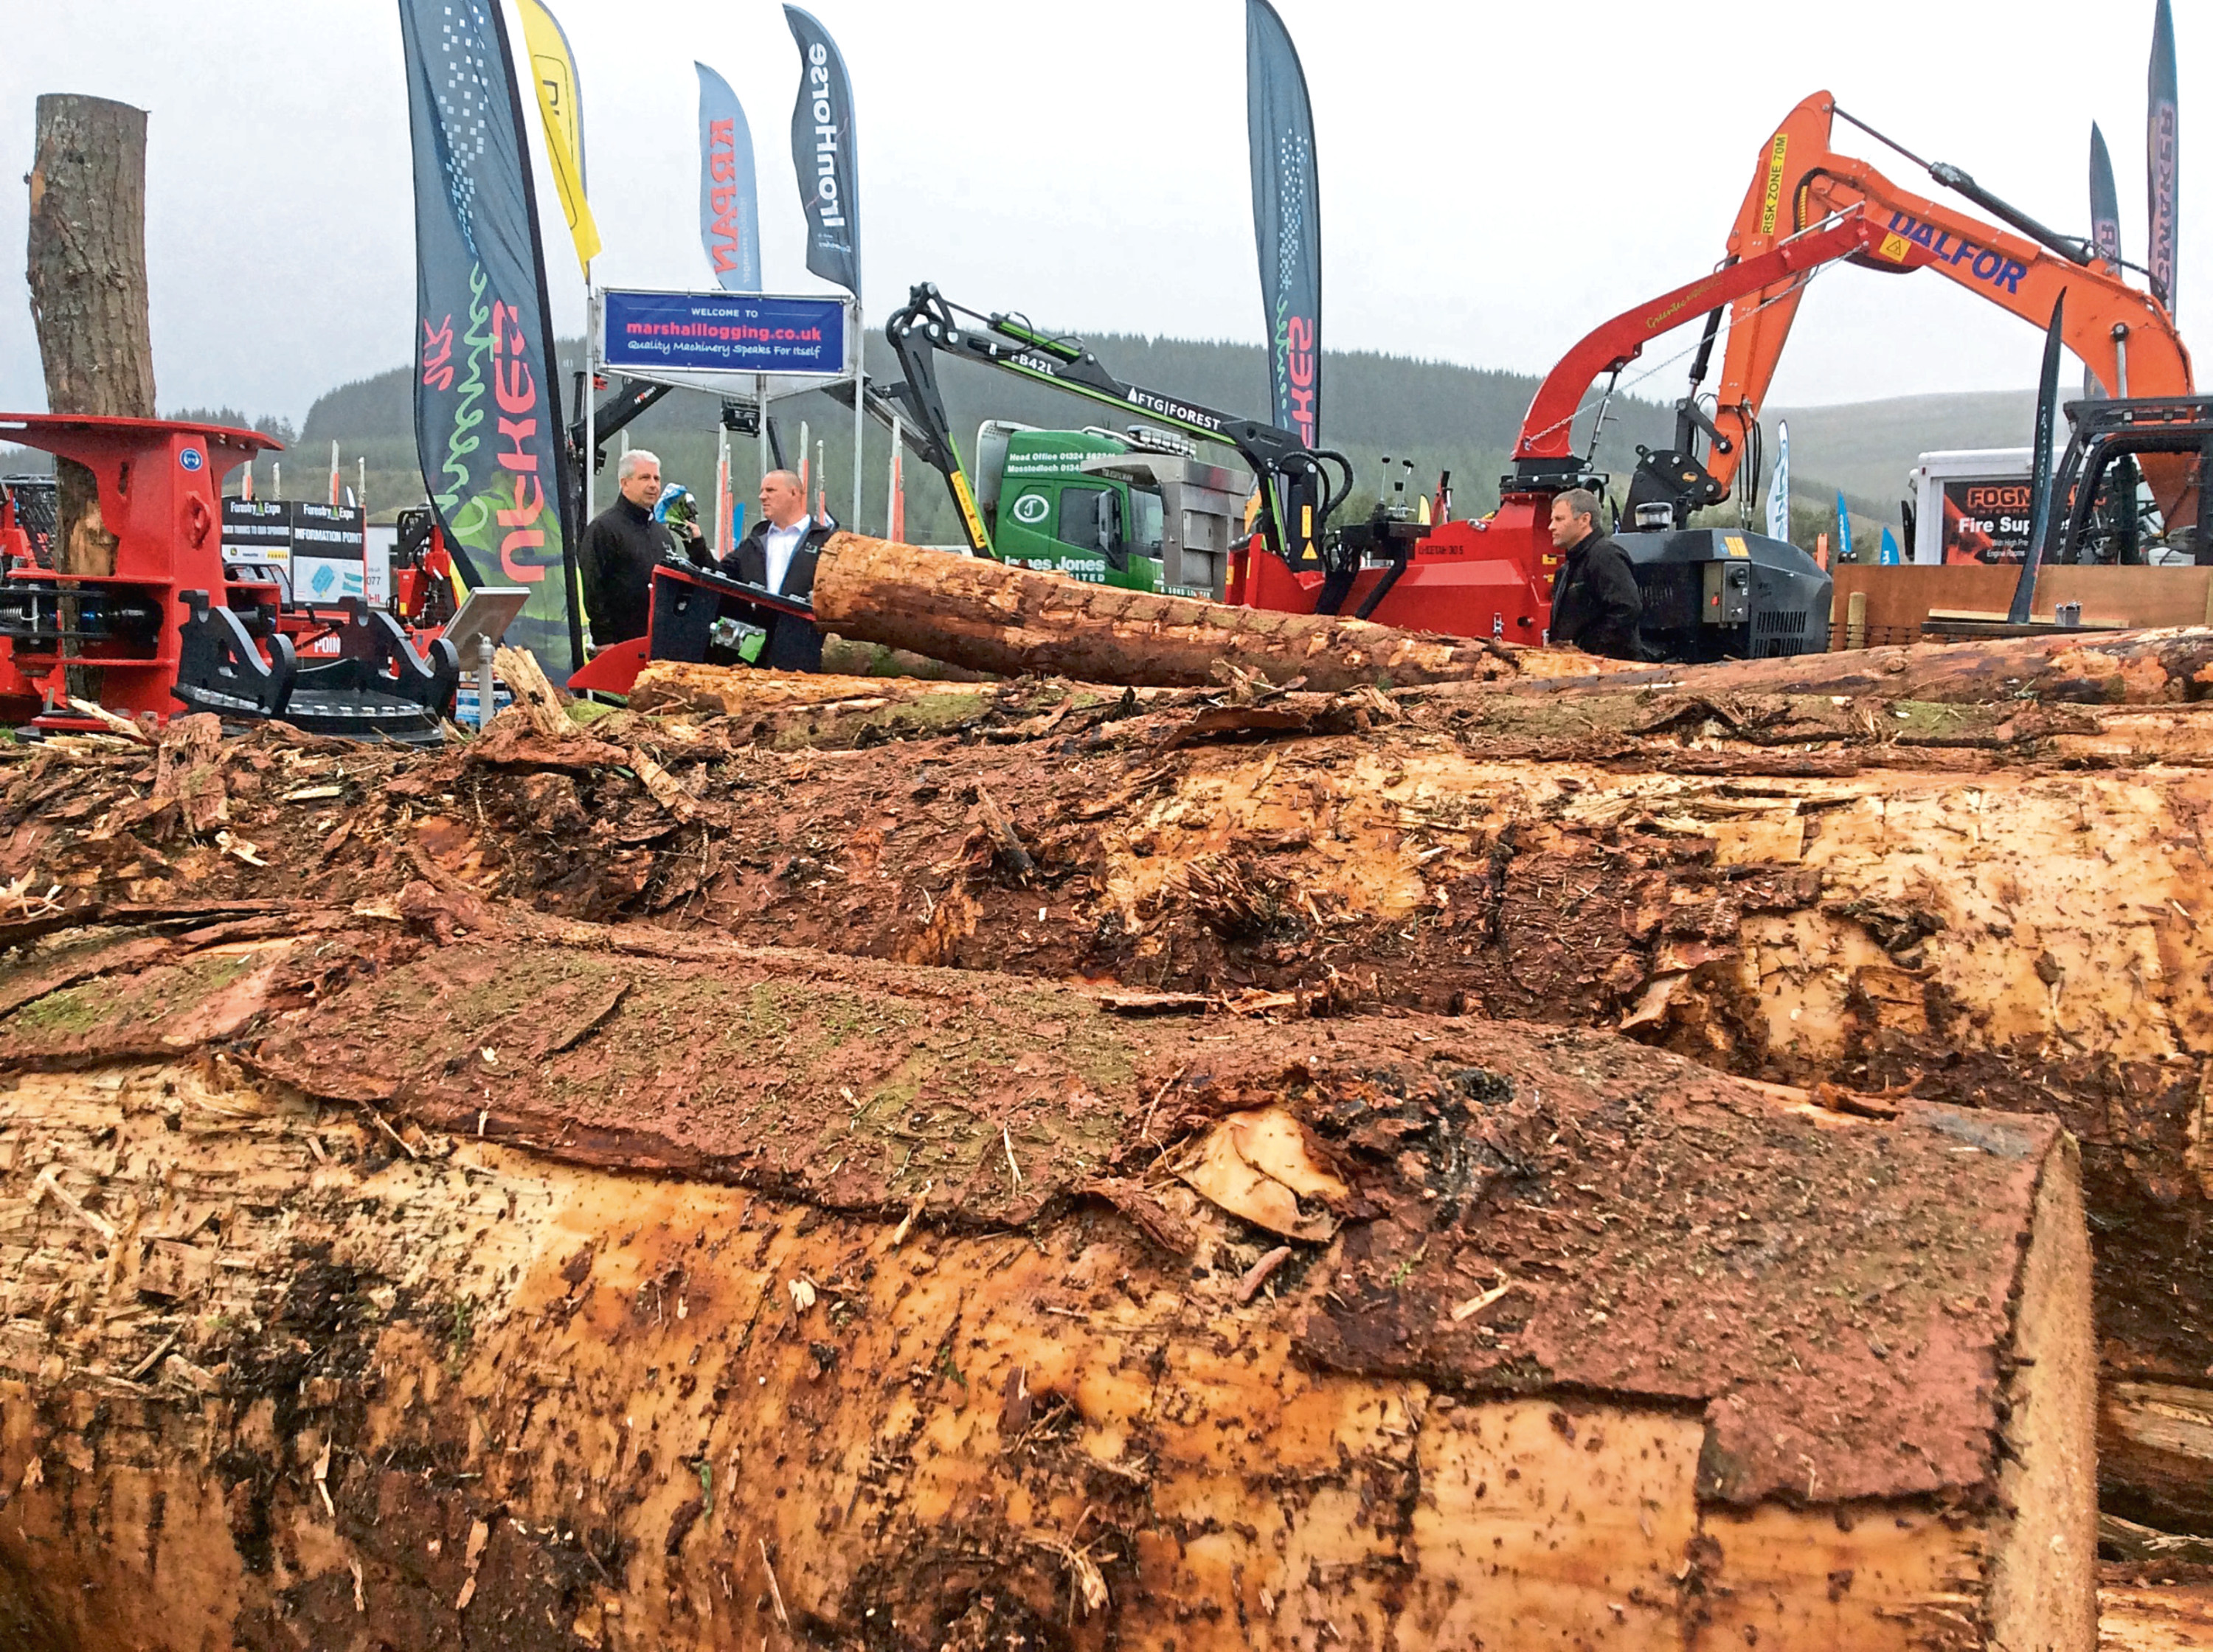 The latest equipment and ideas were on show at Forestry Expo in South Lanarkshire. Photograph by Mike Assenti